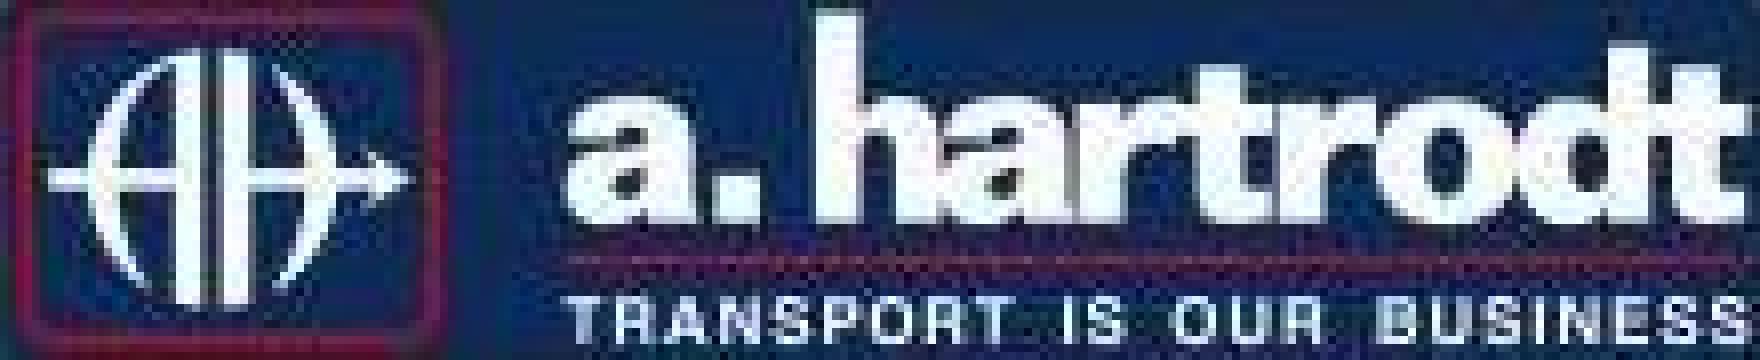 Transport maritim in container LCL/FCL